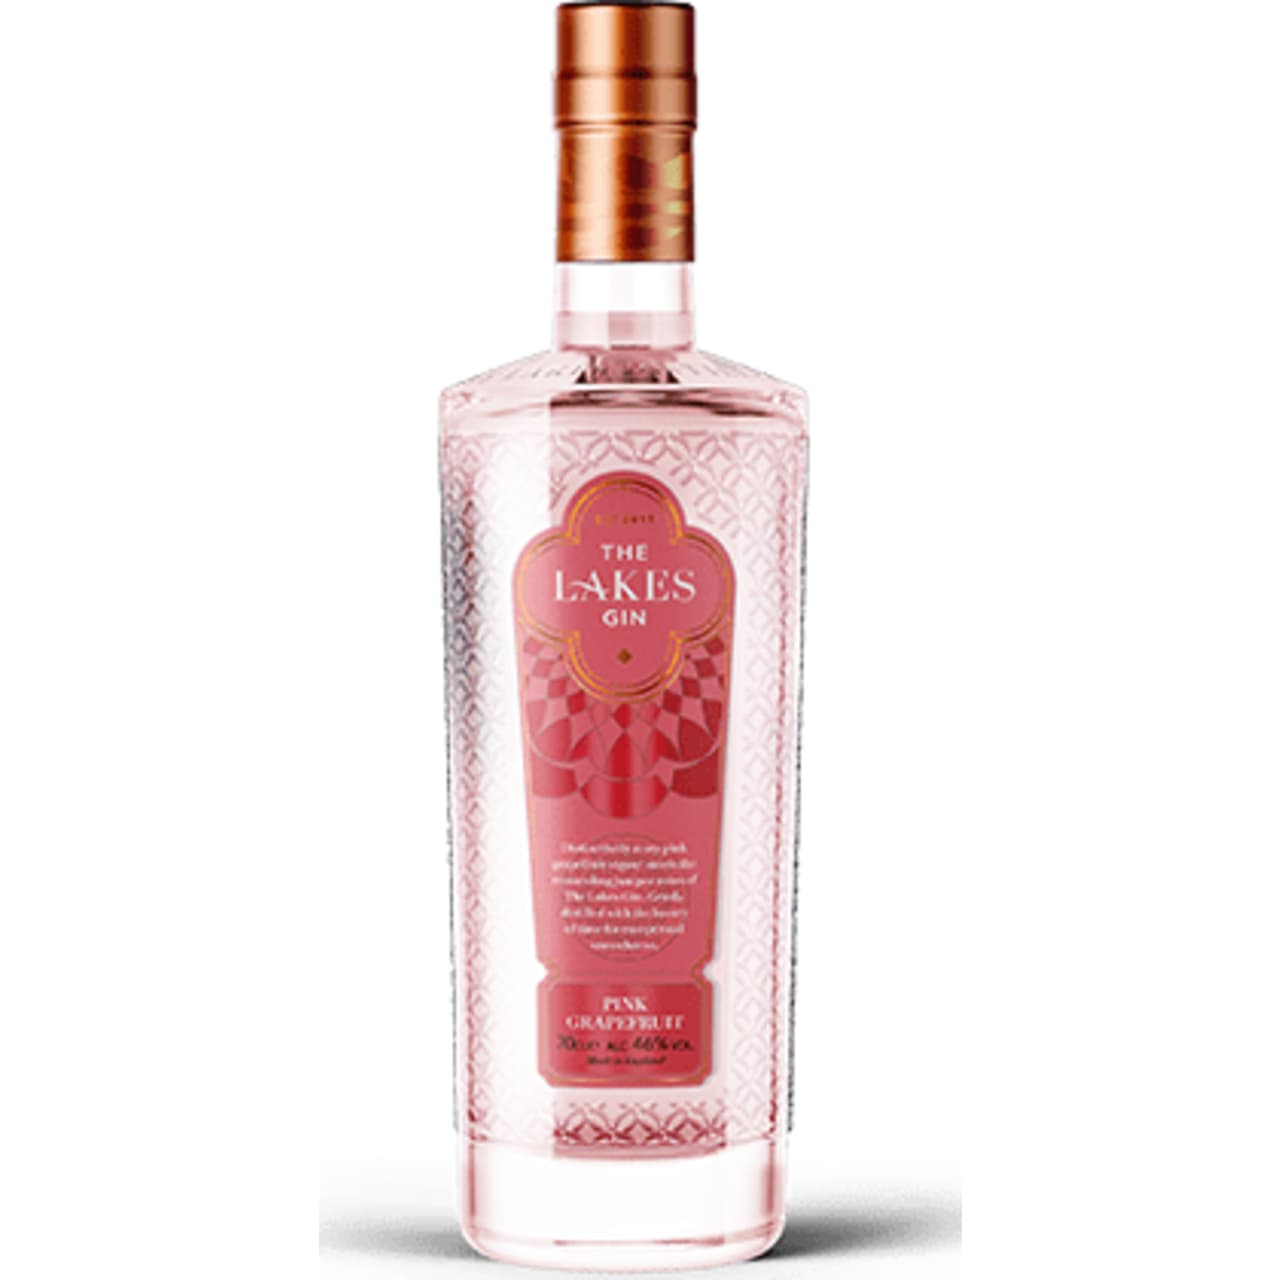 Distinctively zesty pink grapefruit vigour meets the resounding juniper notes of the Lakes Gin.